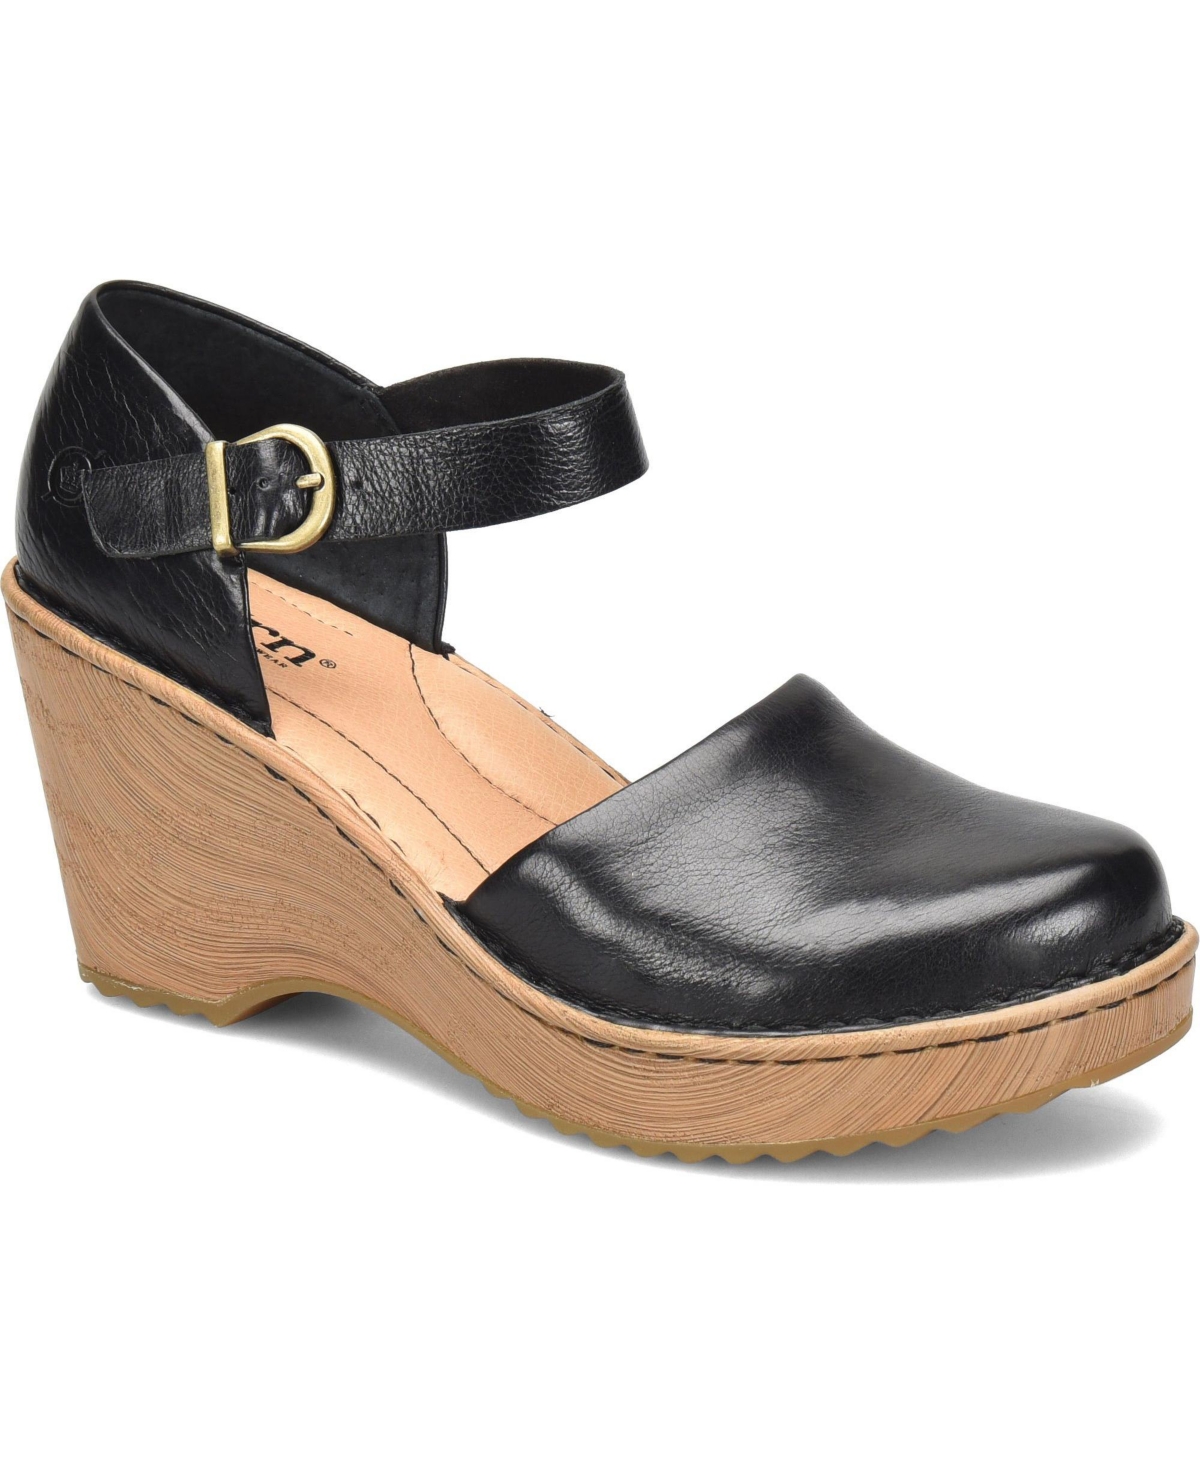 Born Women's Nellie Comfort Mary Jane Wedges Women's Shoes